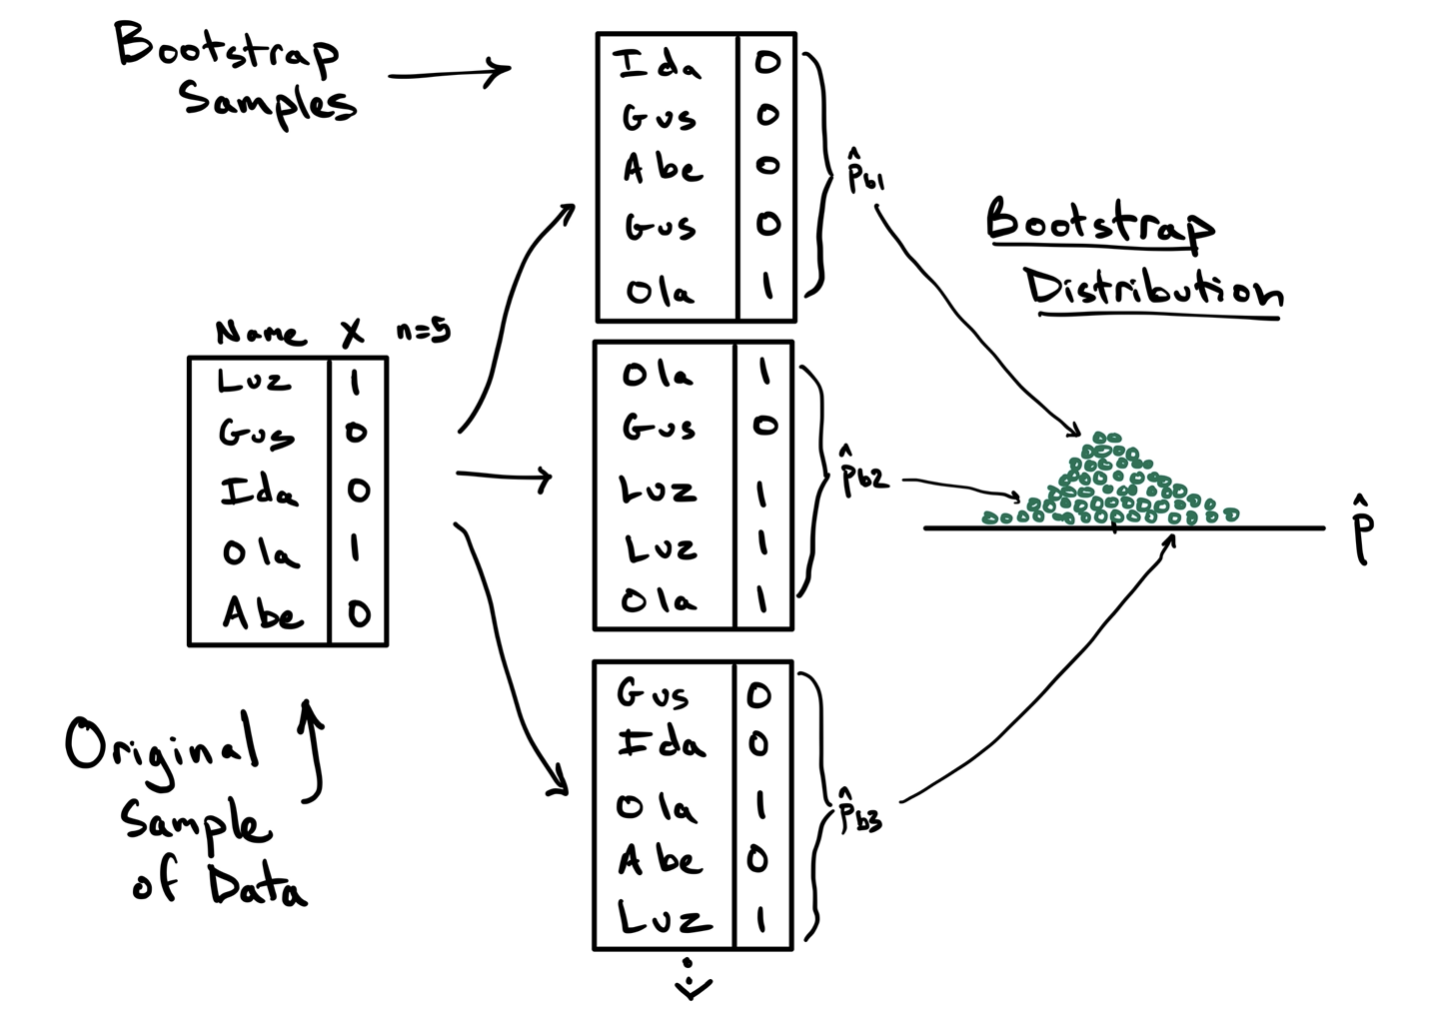 A diagram illustrating how to draw three bootstrap samples of size n=5 with replacement from a sample of size n=5 and form a sampling distribution of the sample proportion.